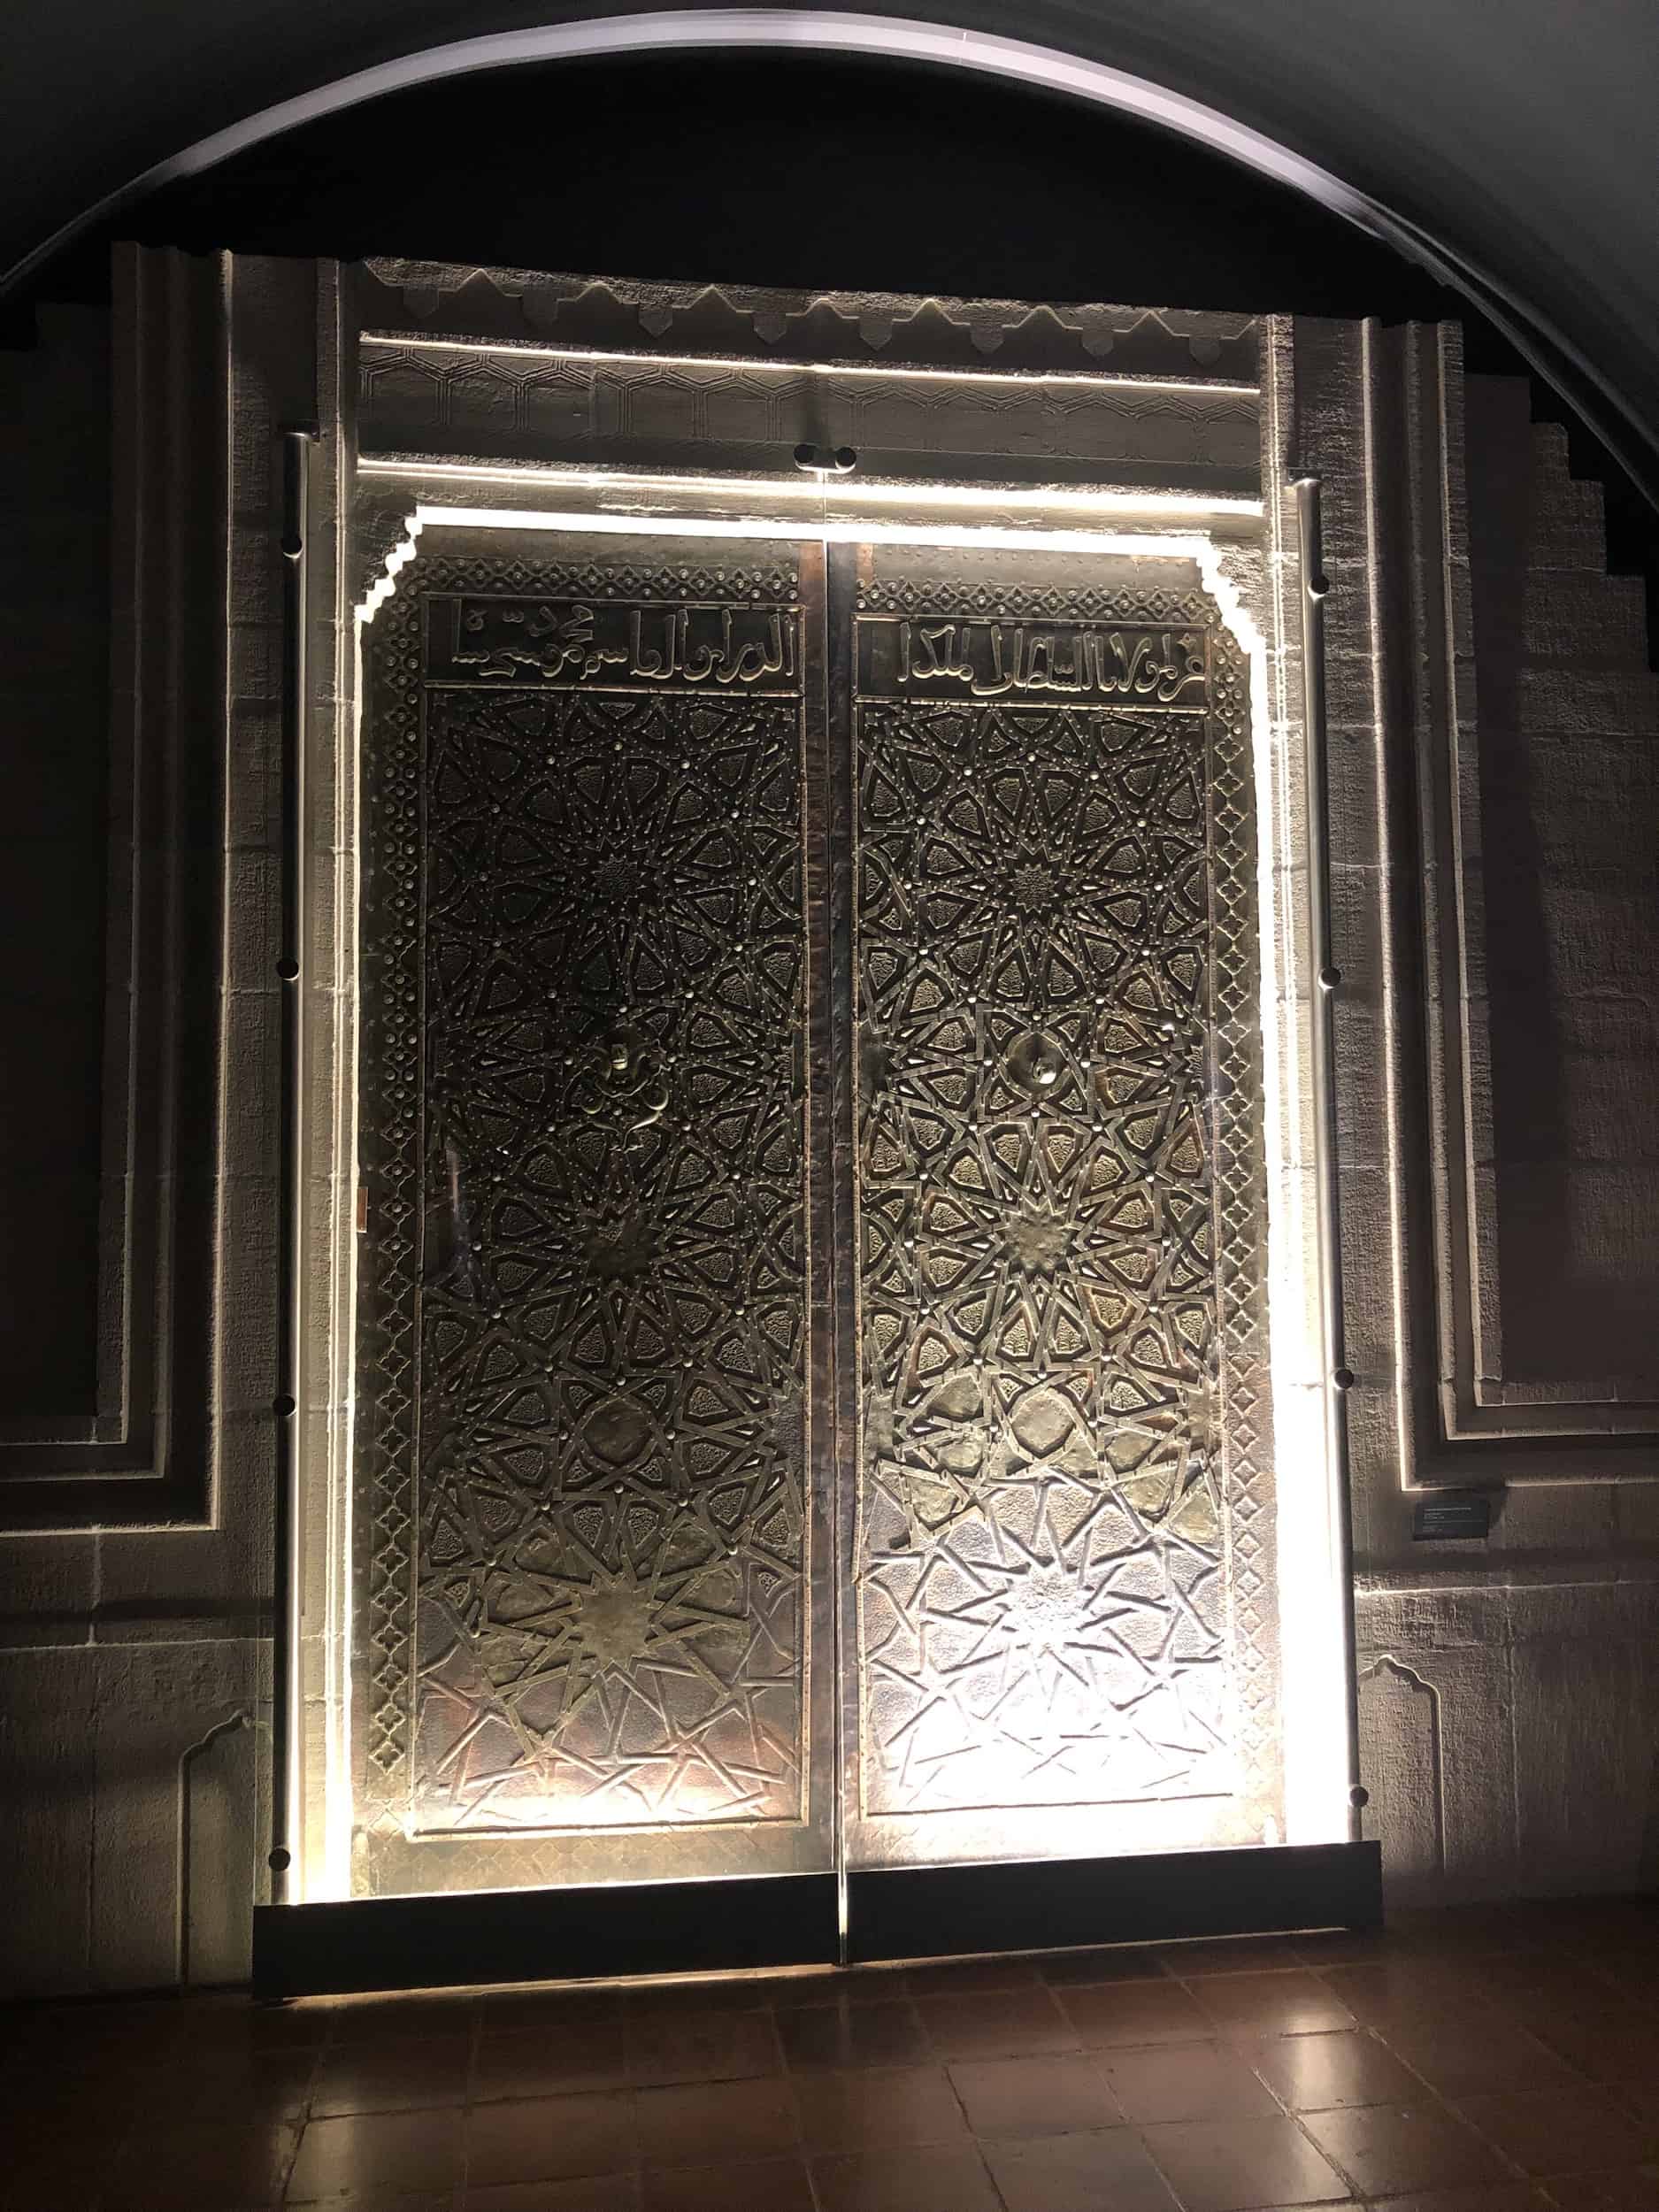 Doors from the Cizre Grand Mosque at the Museum of Turkish and Islamic Arts in Istanbul, Turkey